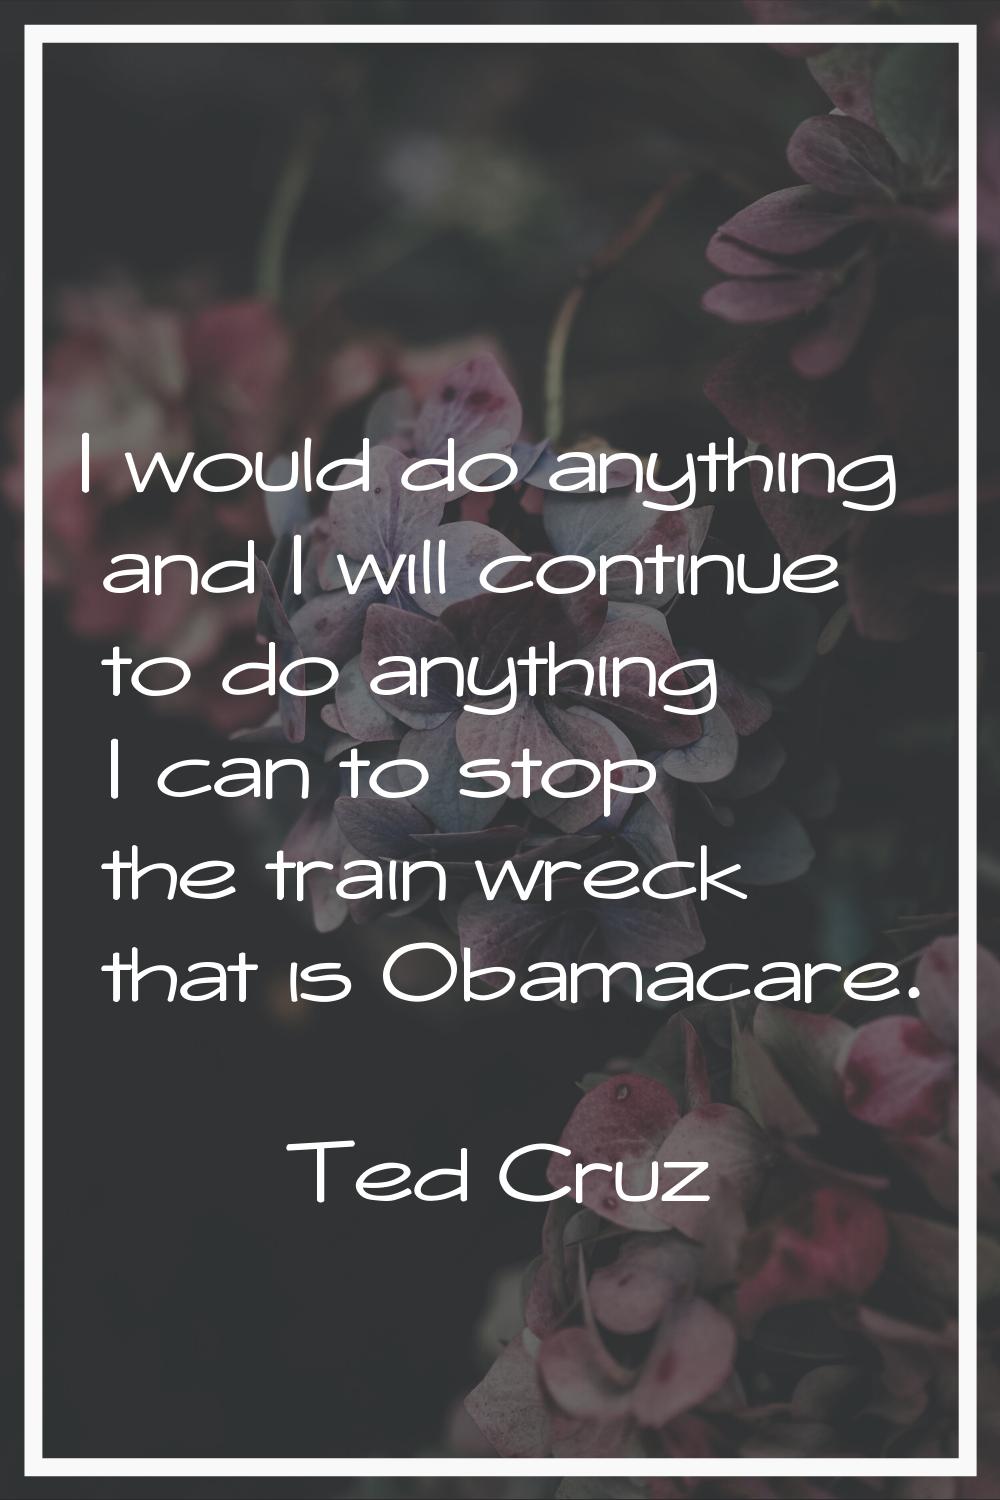 I would do anything and I will continue to do anything I can to stop the train wreck that is Obamac